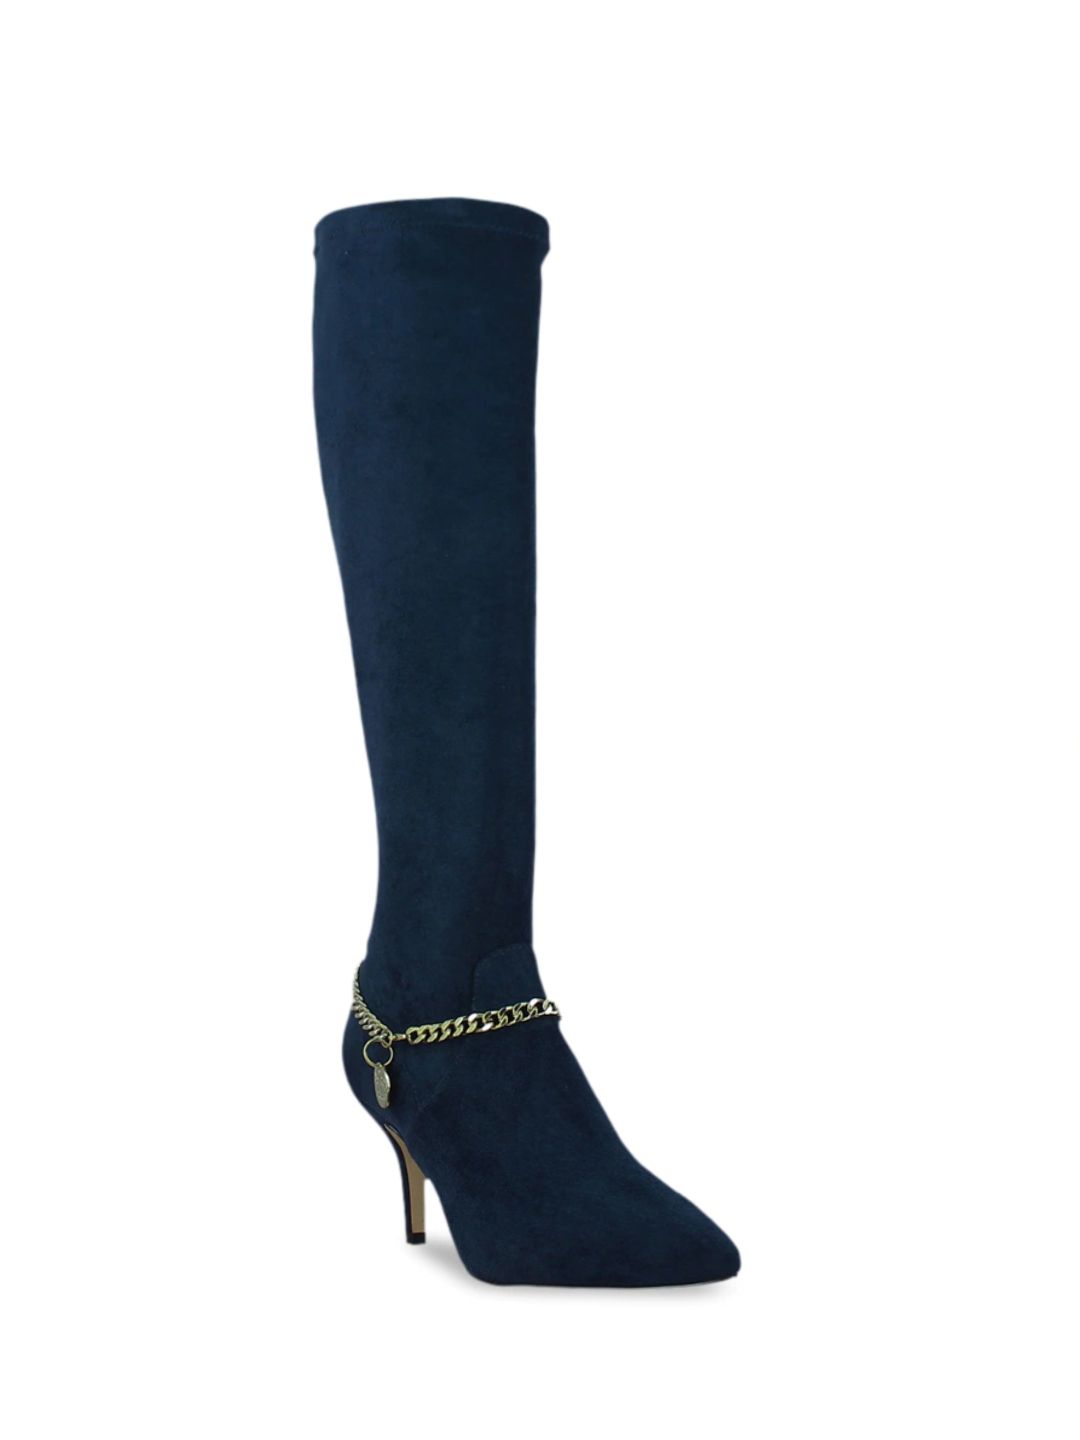 Saint G Navy Blue Leather Heeled Boots Price in India